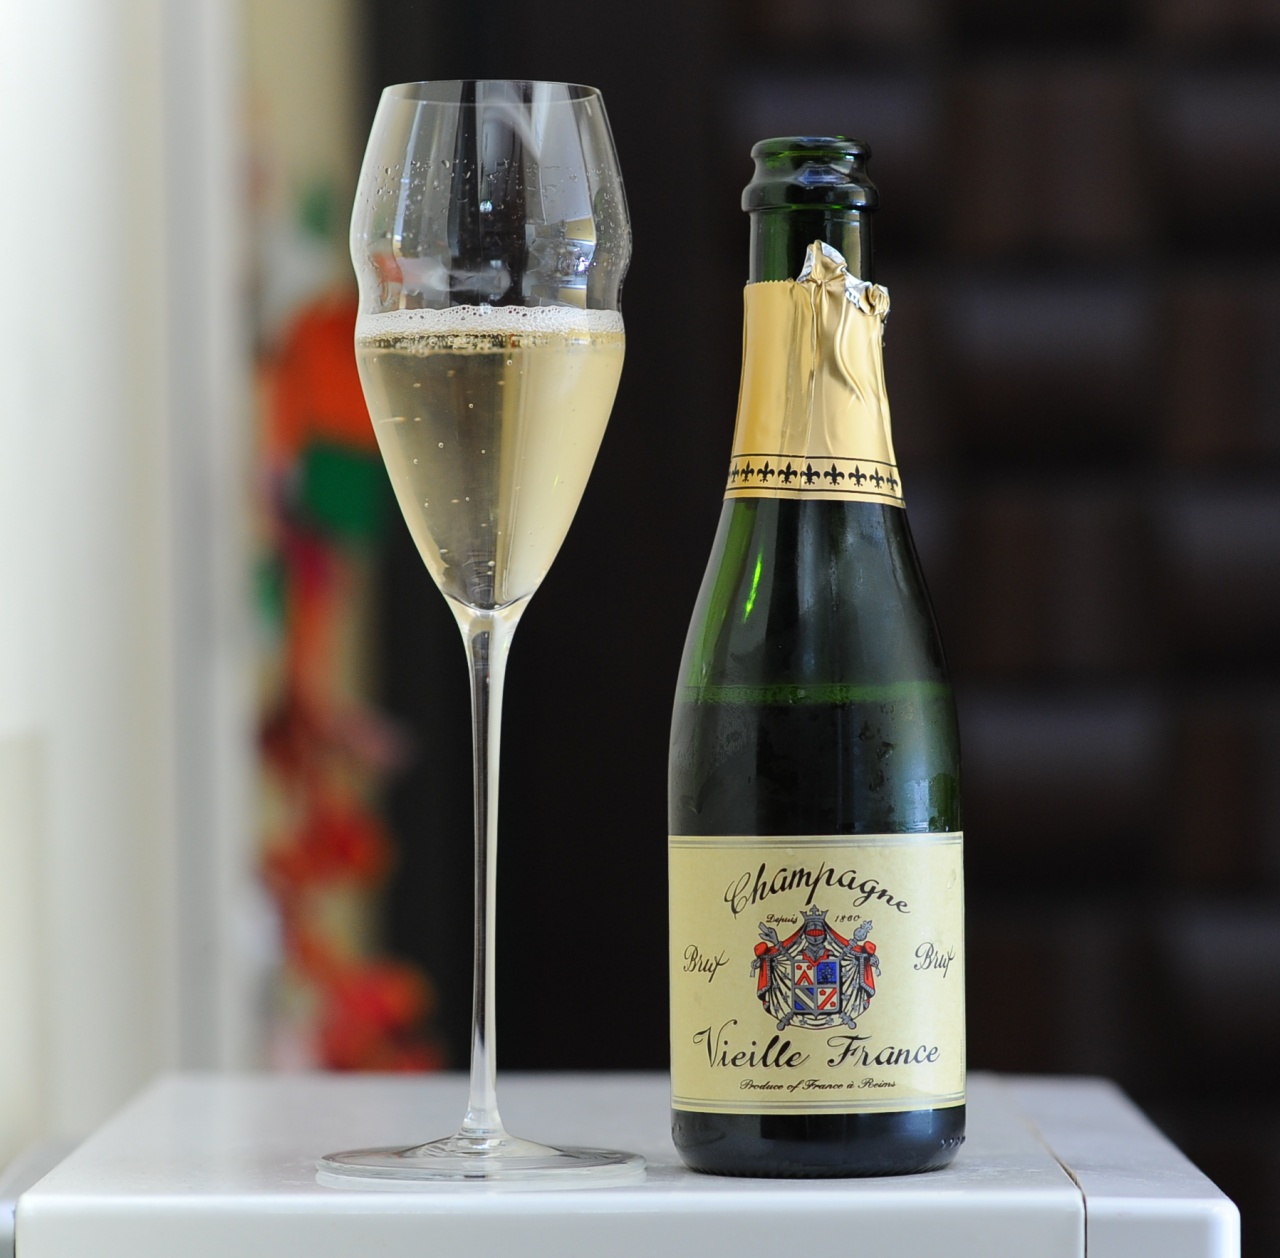 Vieille France Brut Champagne